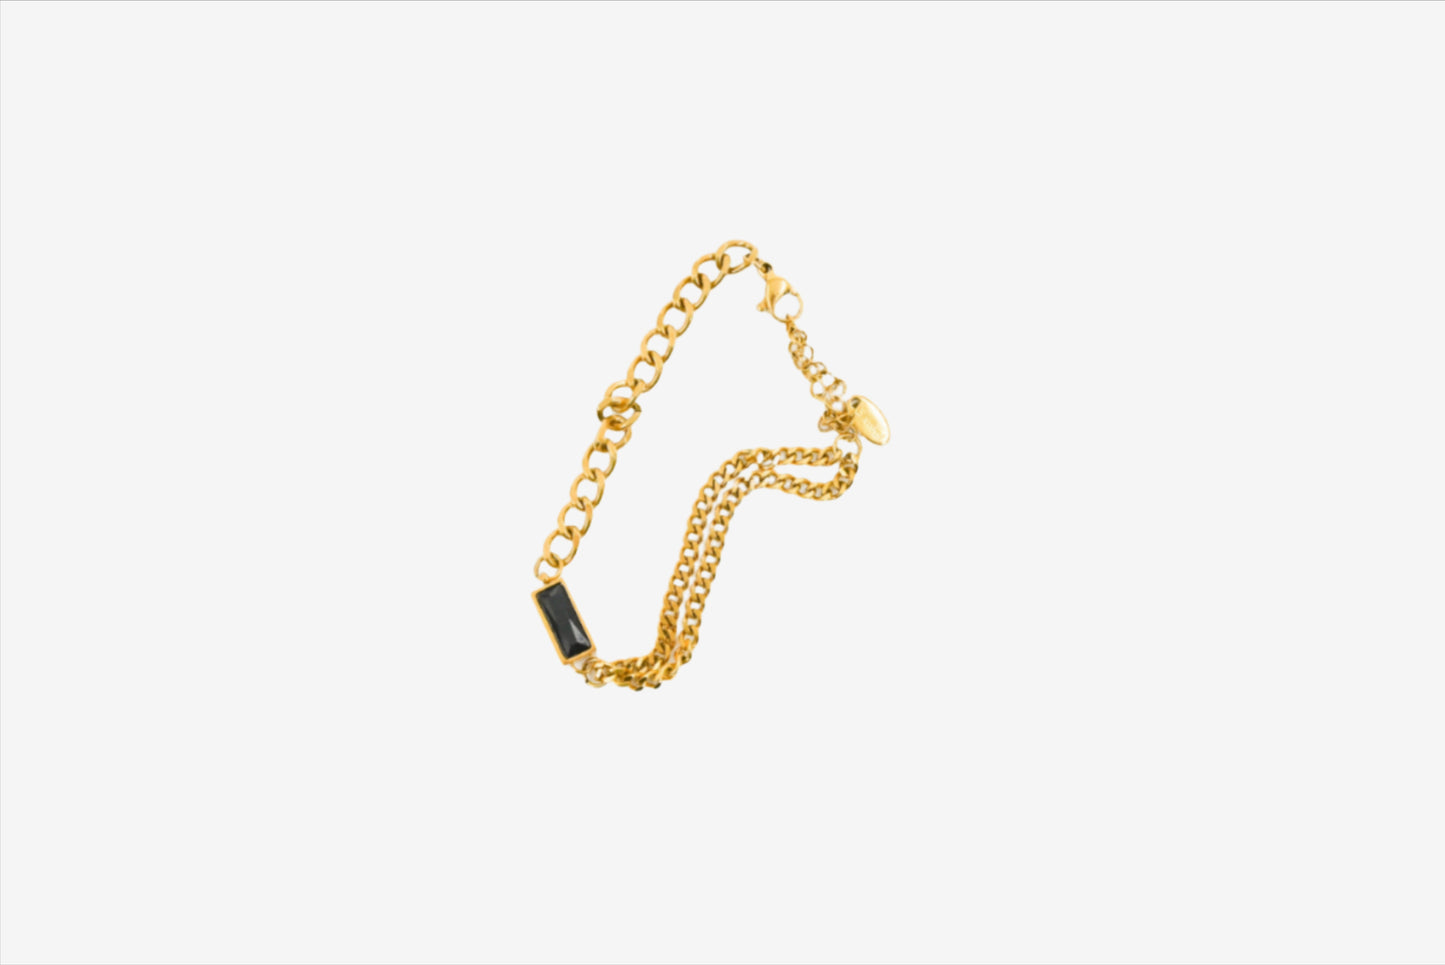 gold chain bracelet with black stone accent